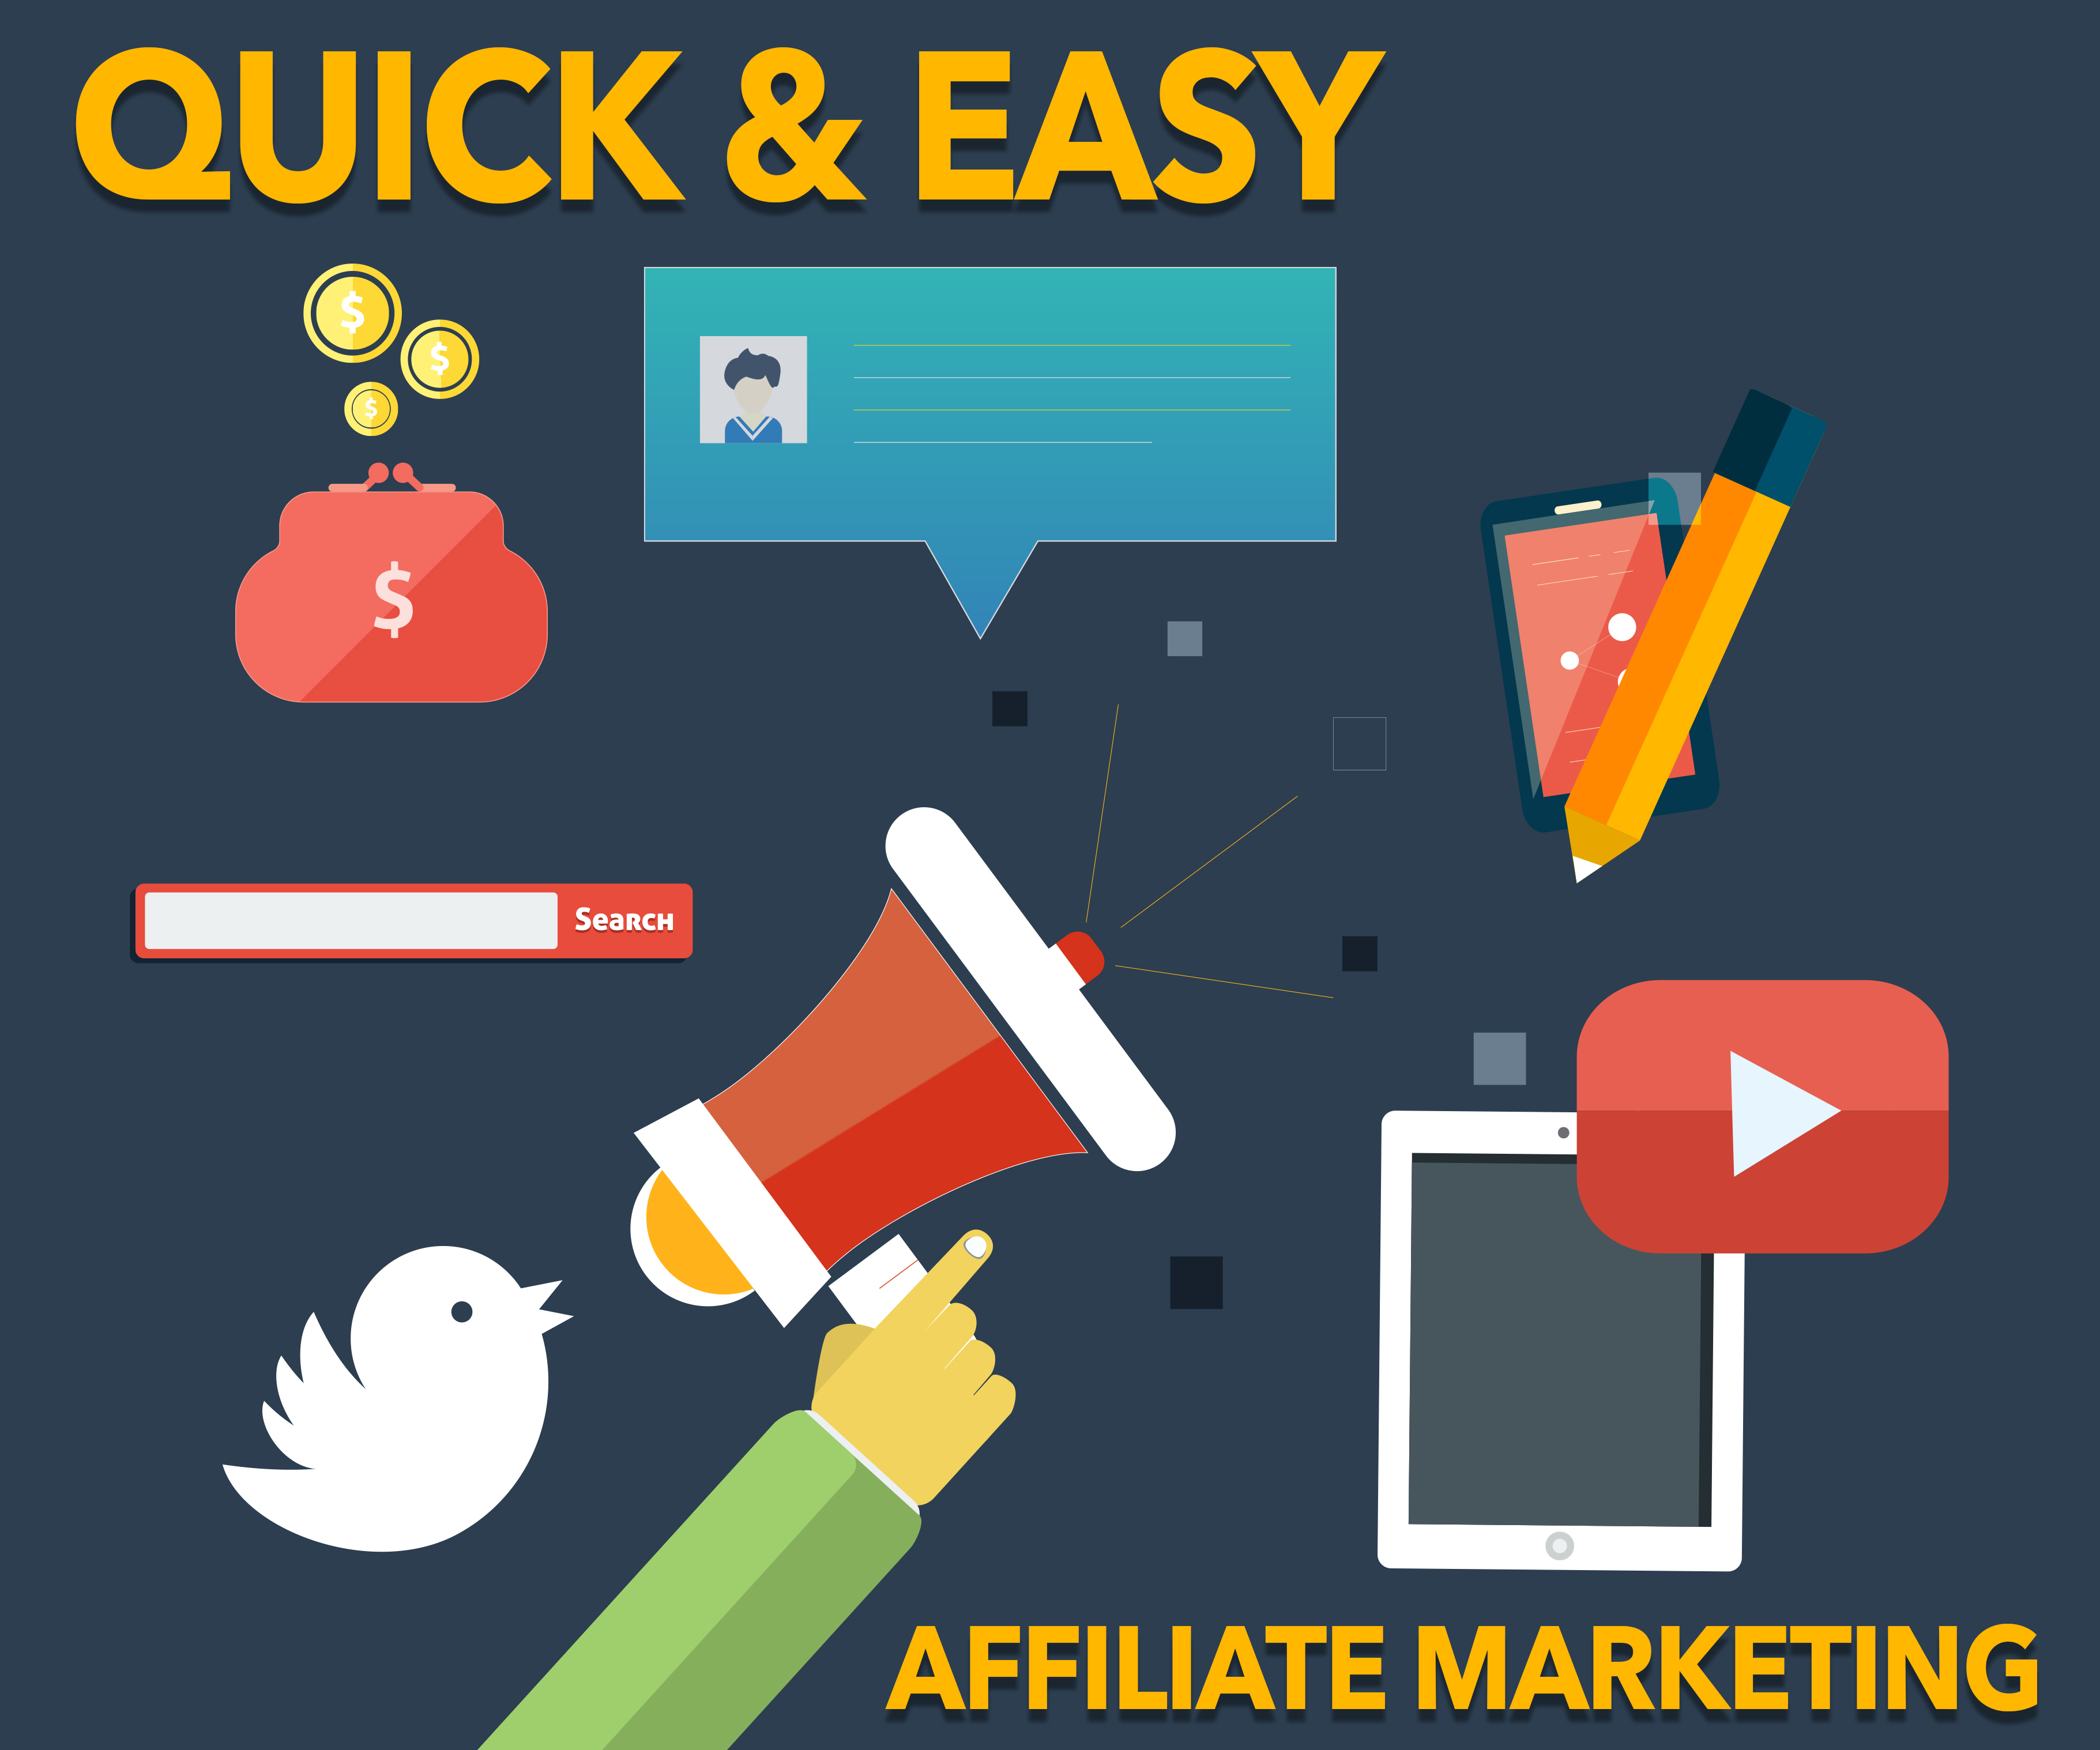 Quick & Easy Affiliate Marketing Presented by Shawn Hansen